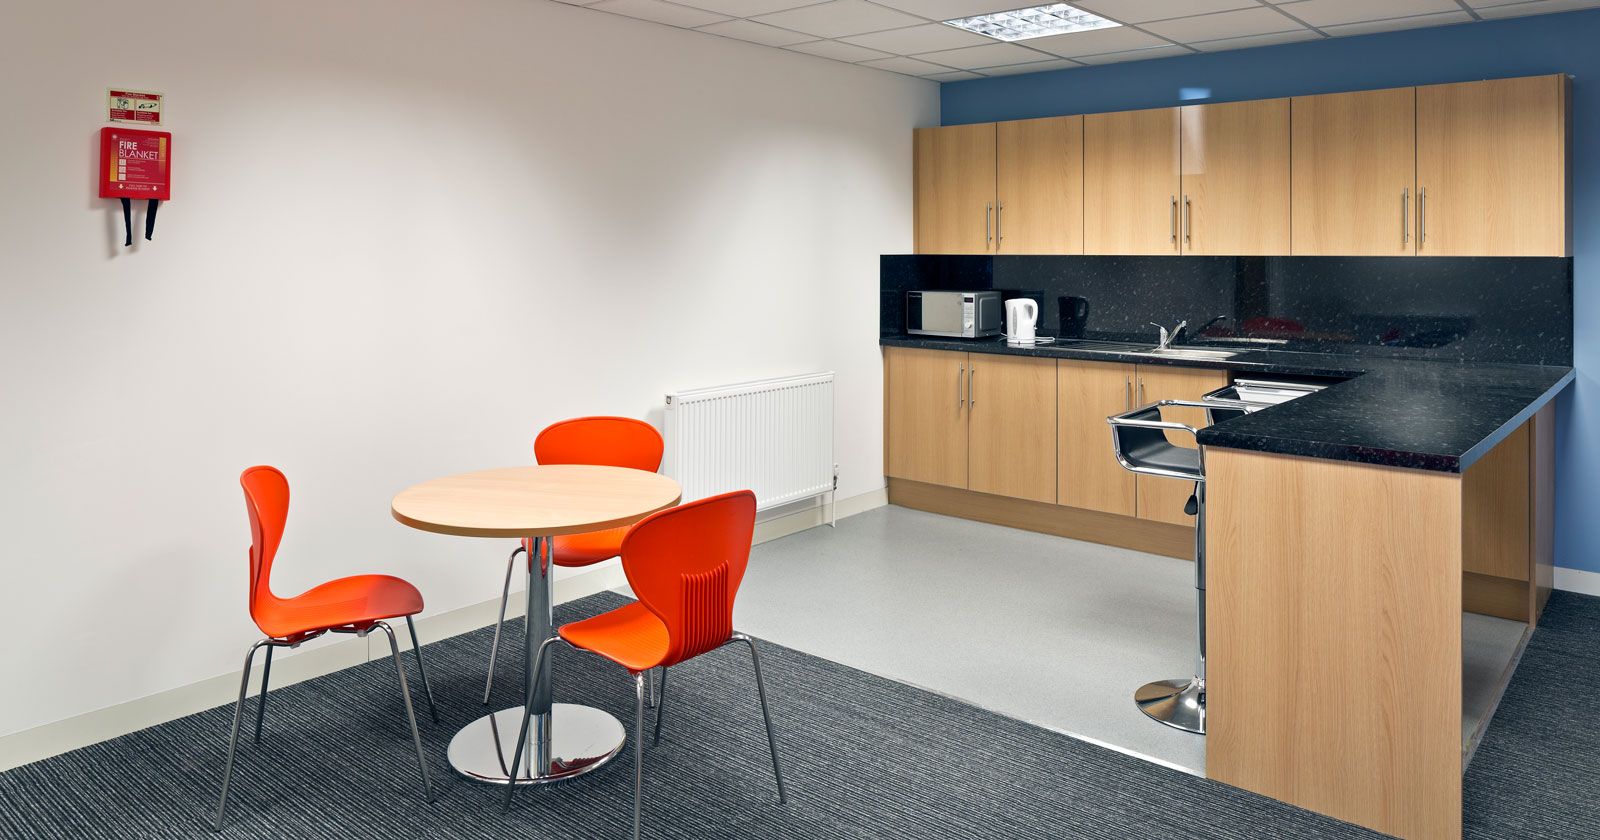 AW Repair Group Break Out Area and Staff Kitchen with office furniture provided by APSS